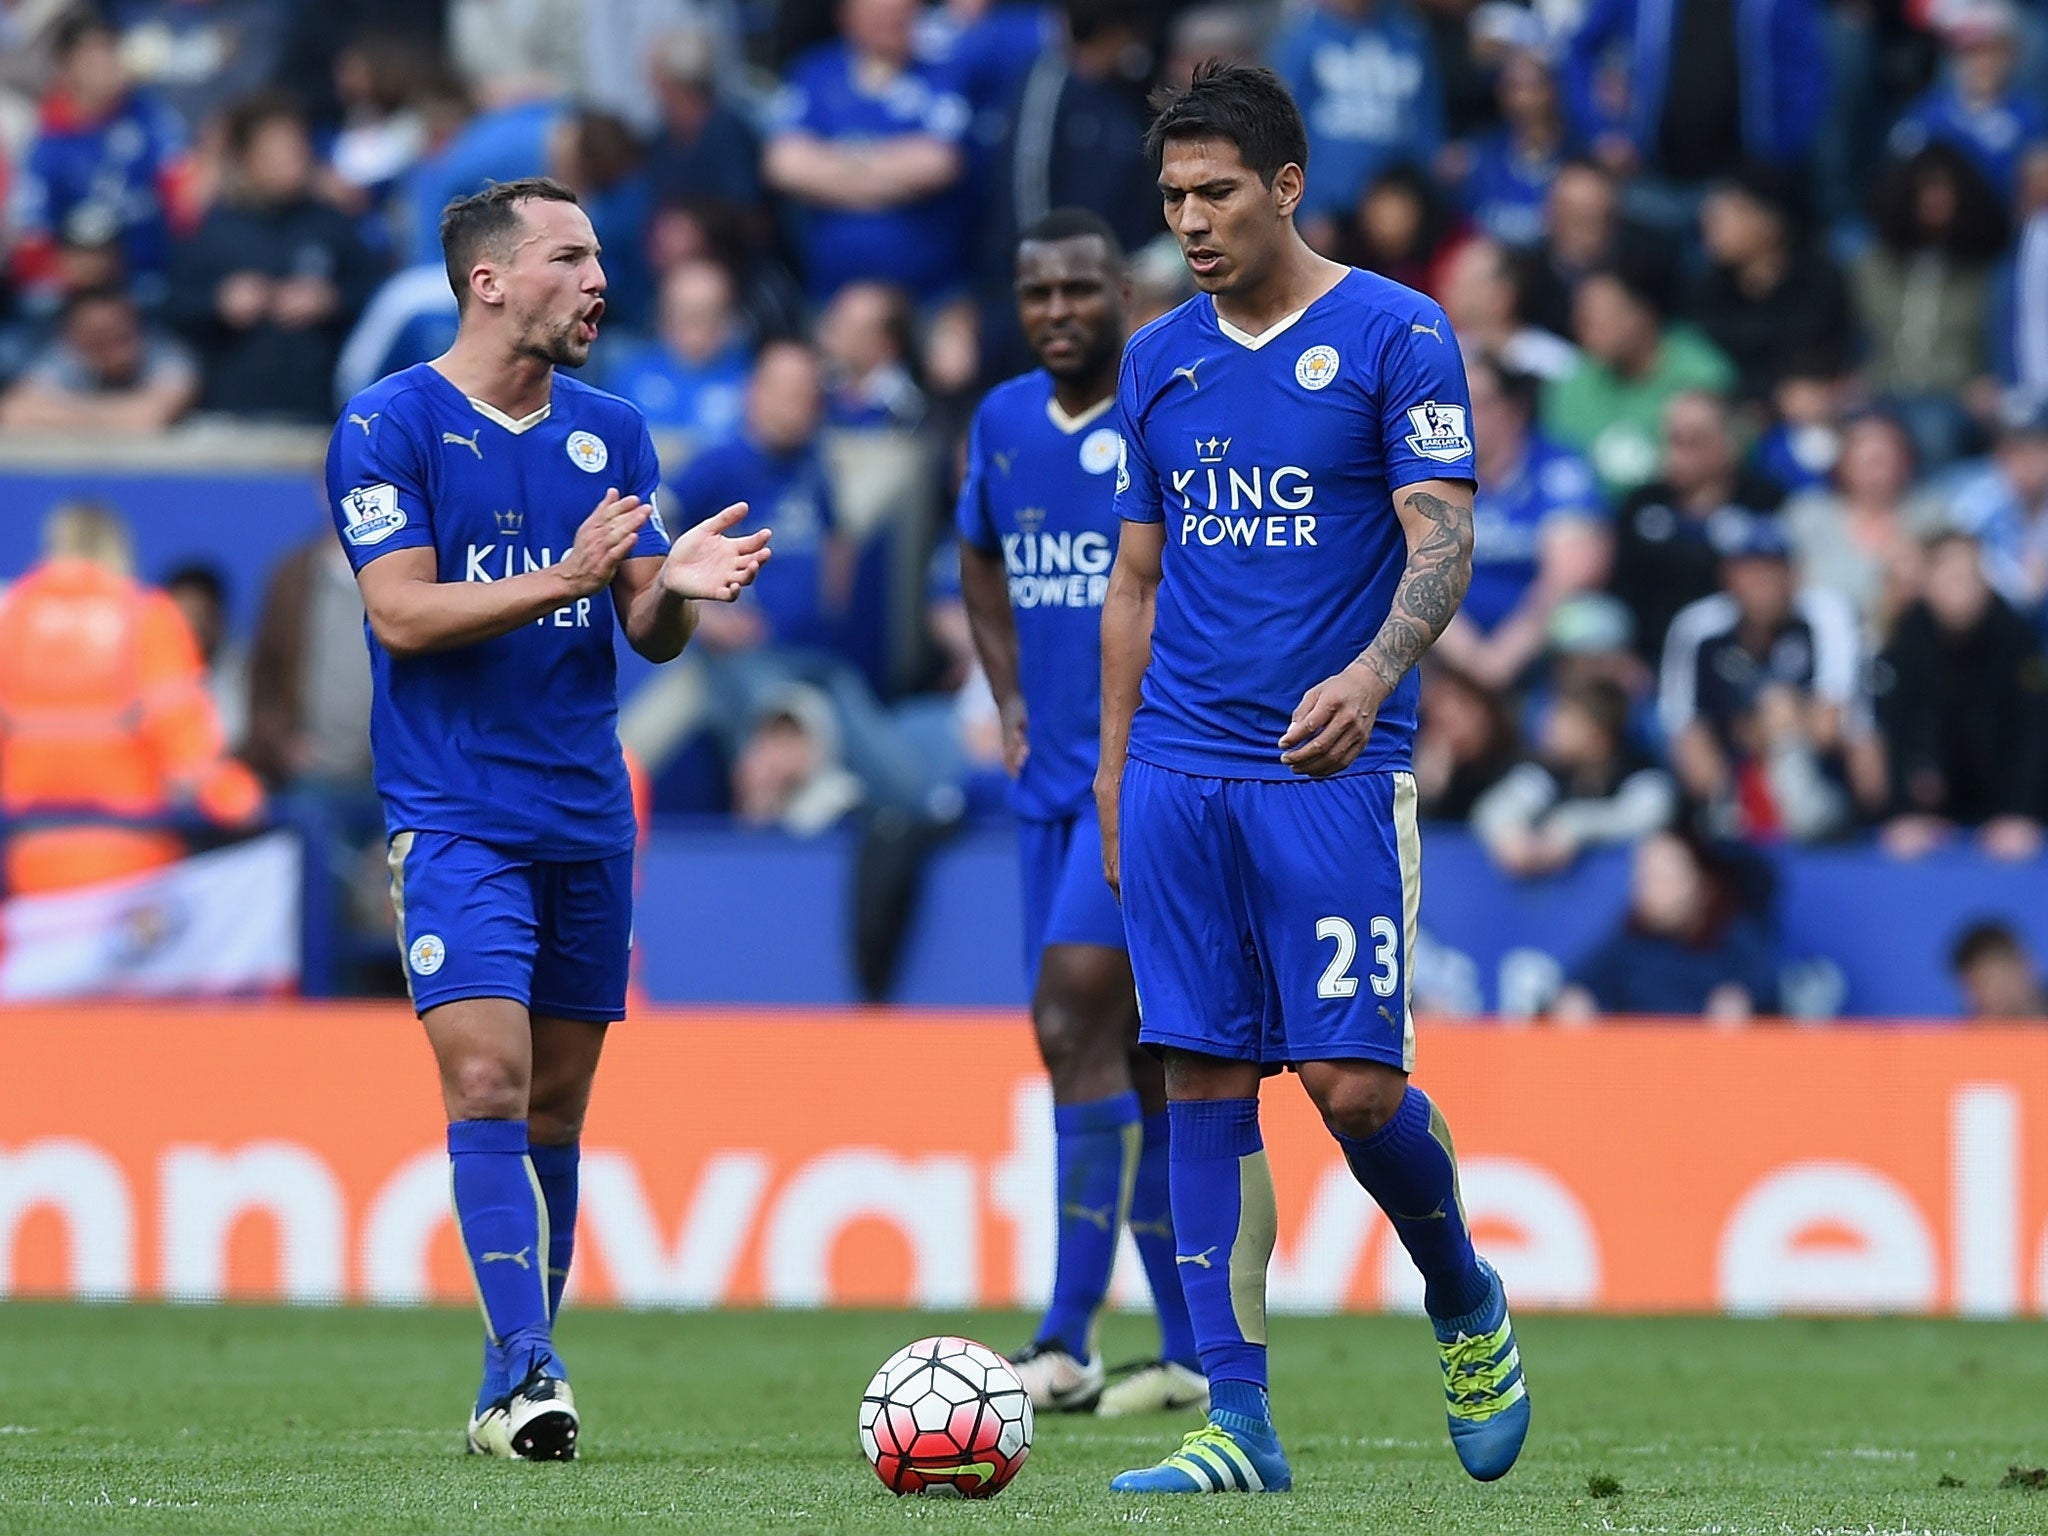 A few of the Leicester players during their match with West Ham